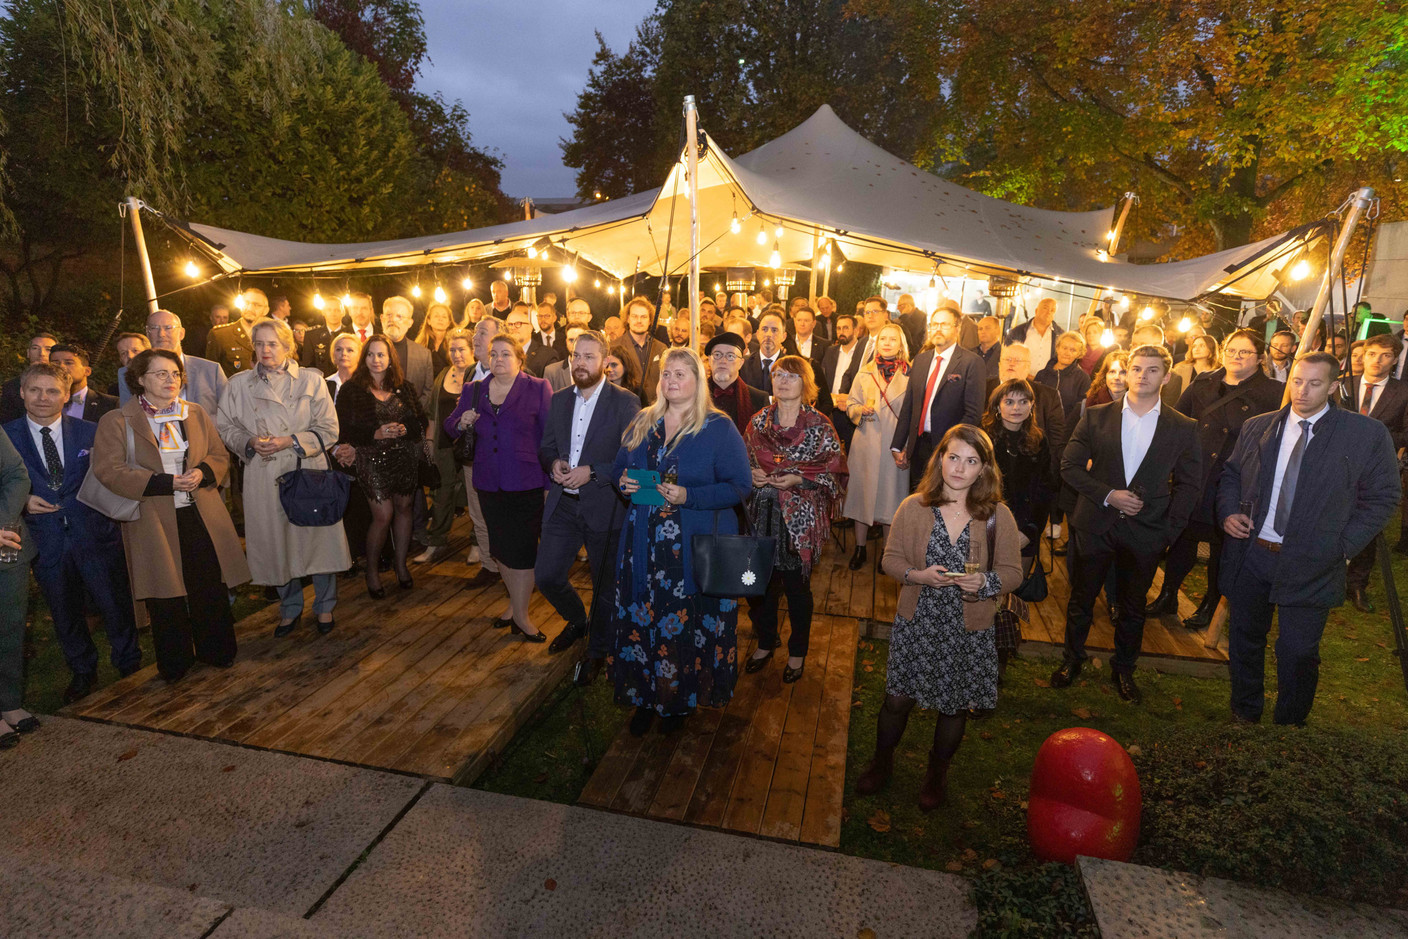 The guests listened to Vladimir Bärtls’ first reception during his tenure as ambassador. Guy Wolff/Maison Moderne